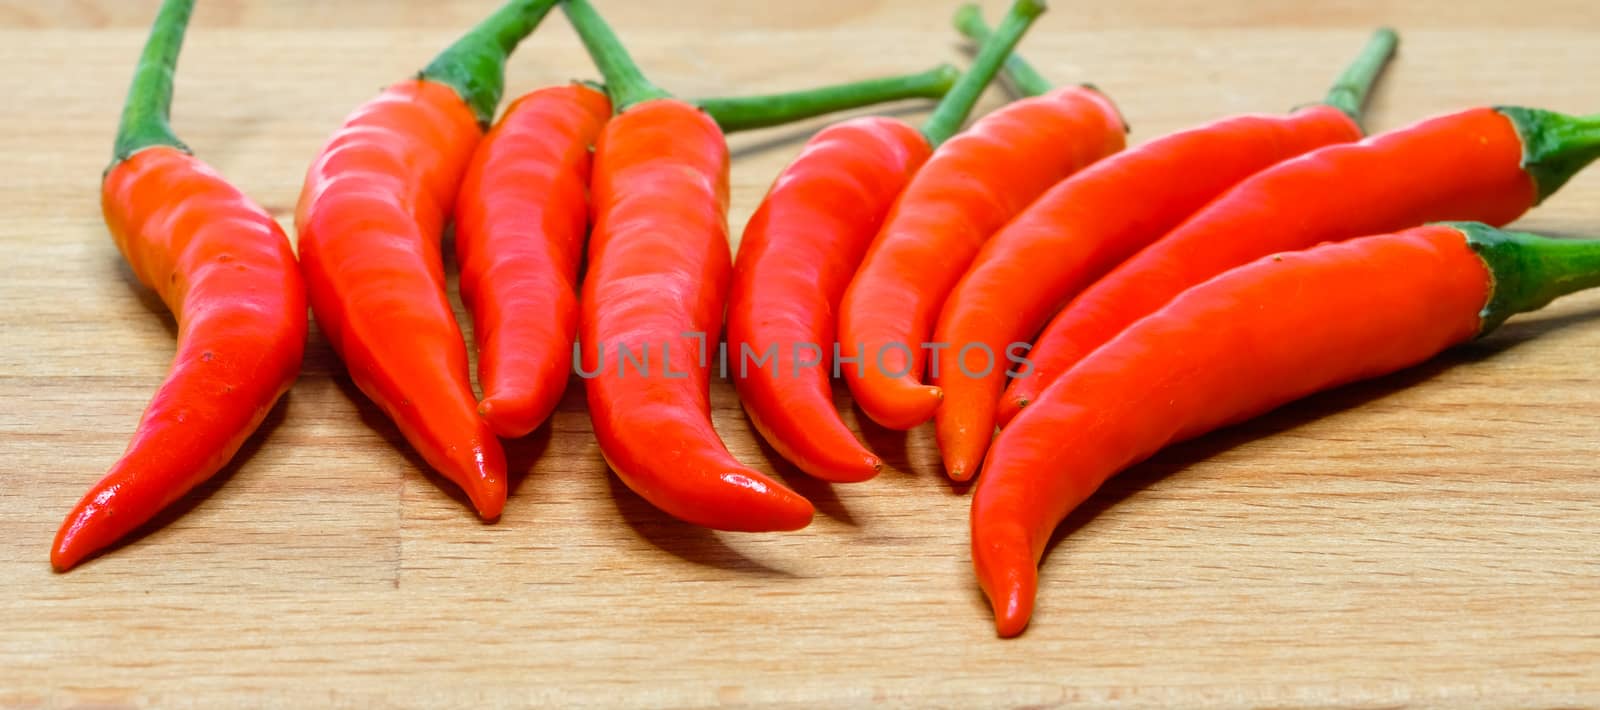 red chilli peppers by Nawoot